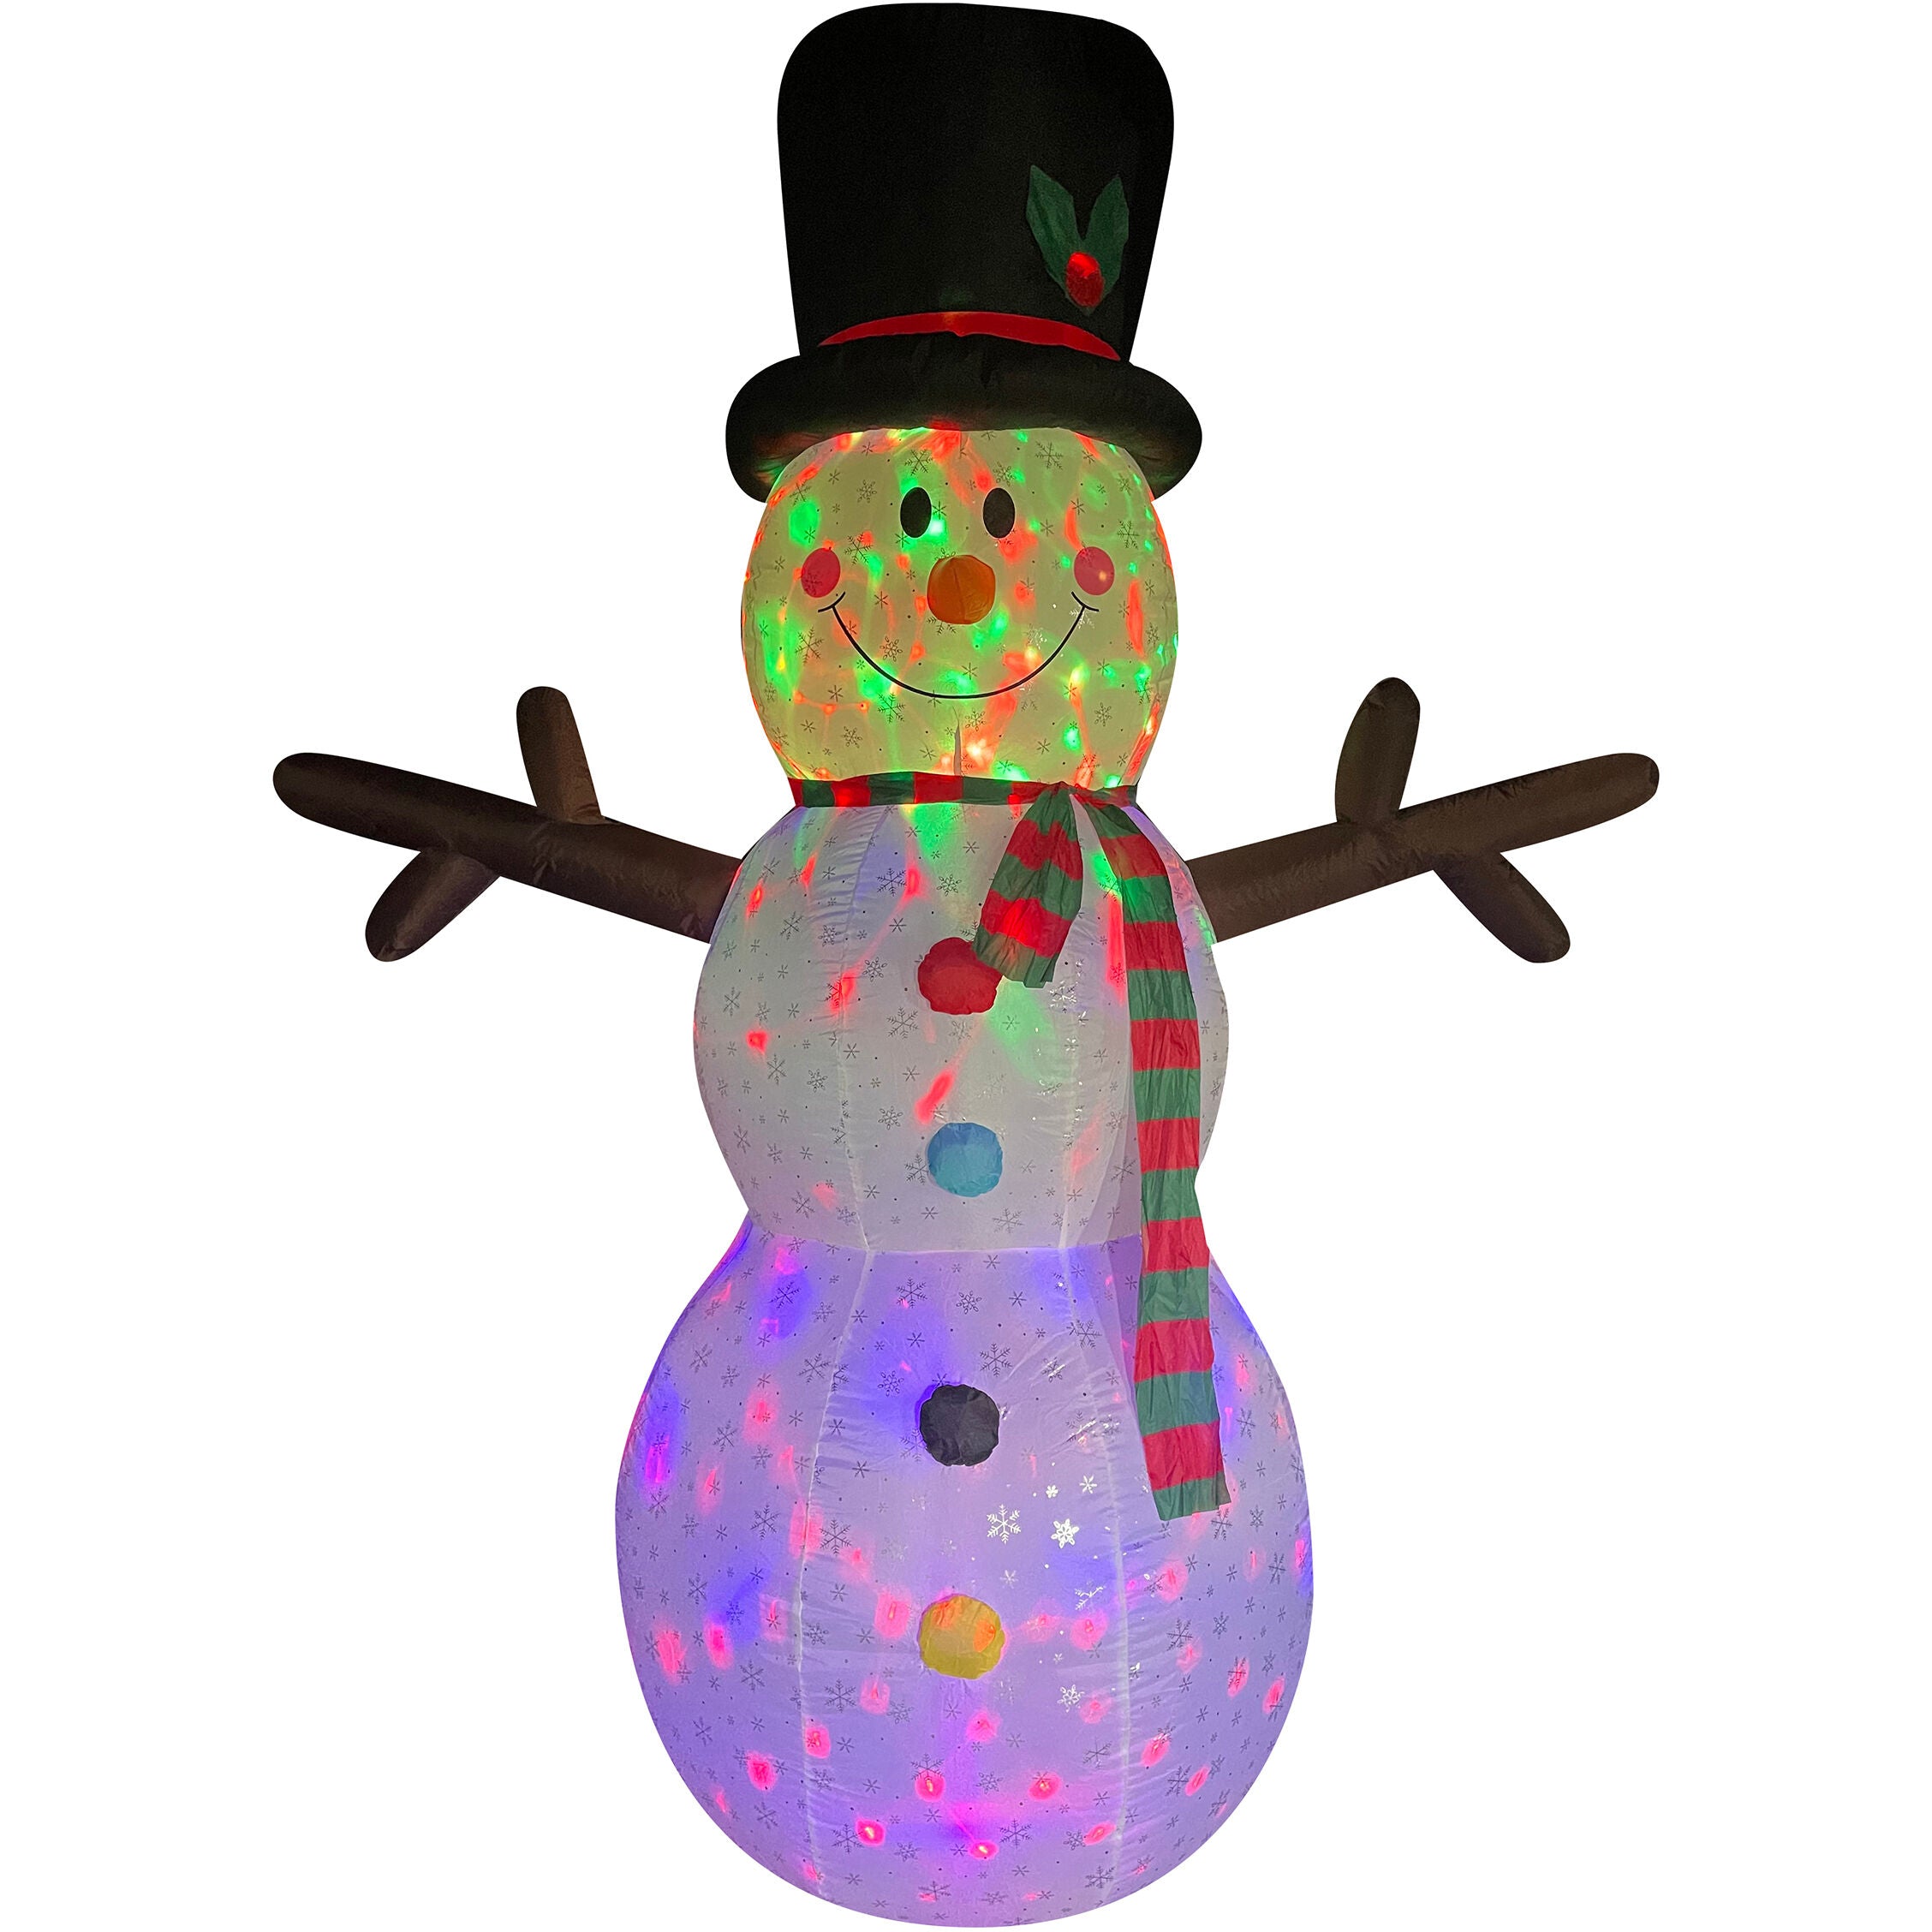 Fraser Hill Farm -  8-Ft. Tall Snowman with Snowflake Print, RGB Lights and Storage Bag, Outdoor Blow-Up Christmas Inflatable